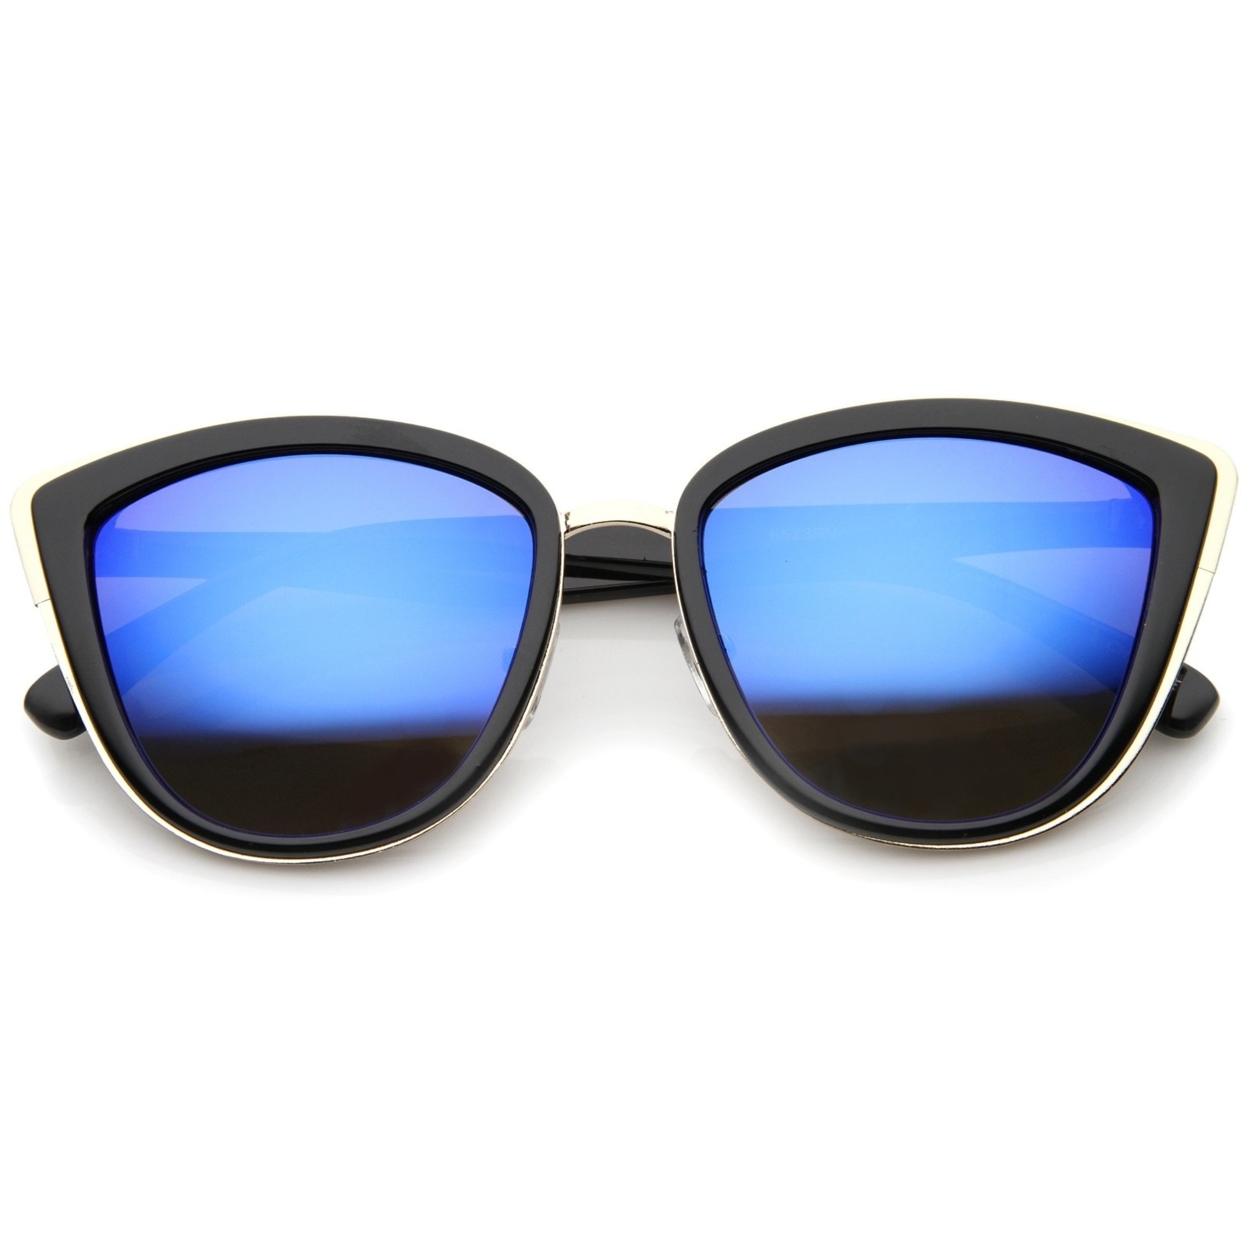 High Fashion Metal Outer Frame Color Mirror Lens Oversized Cat Eye Sunglasses 55mm - Black-Gold / Blue Mirror